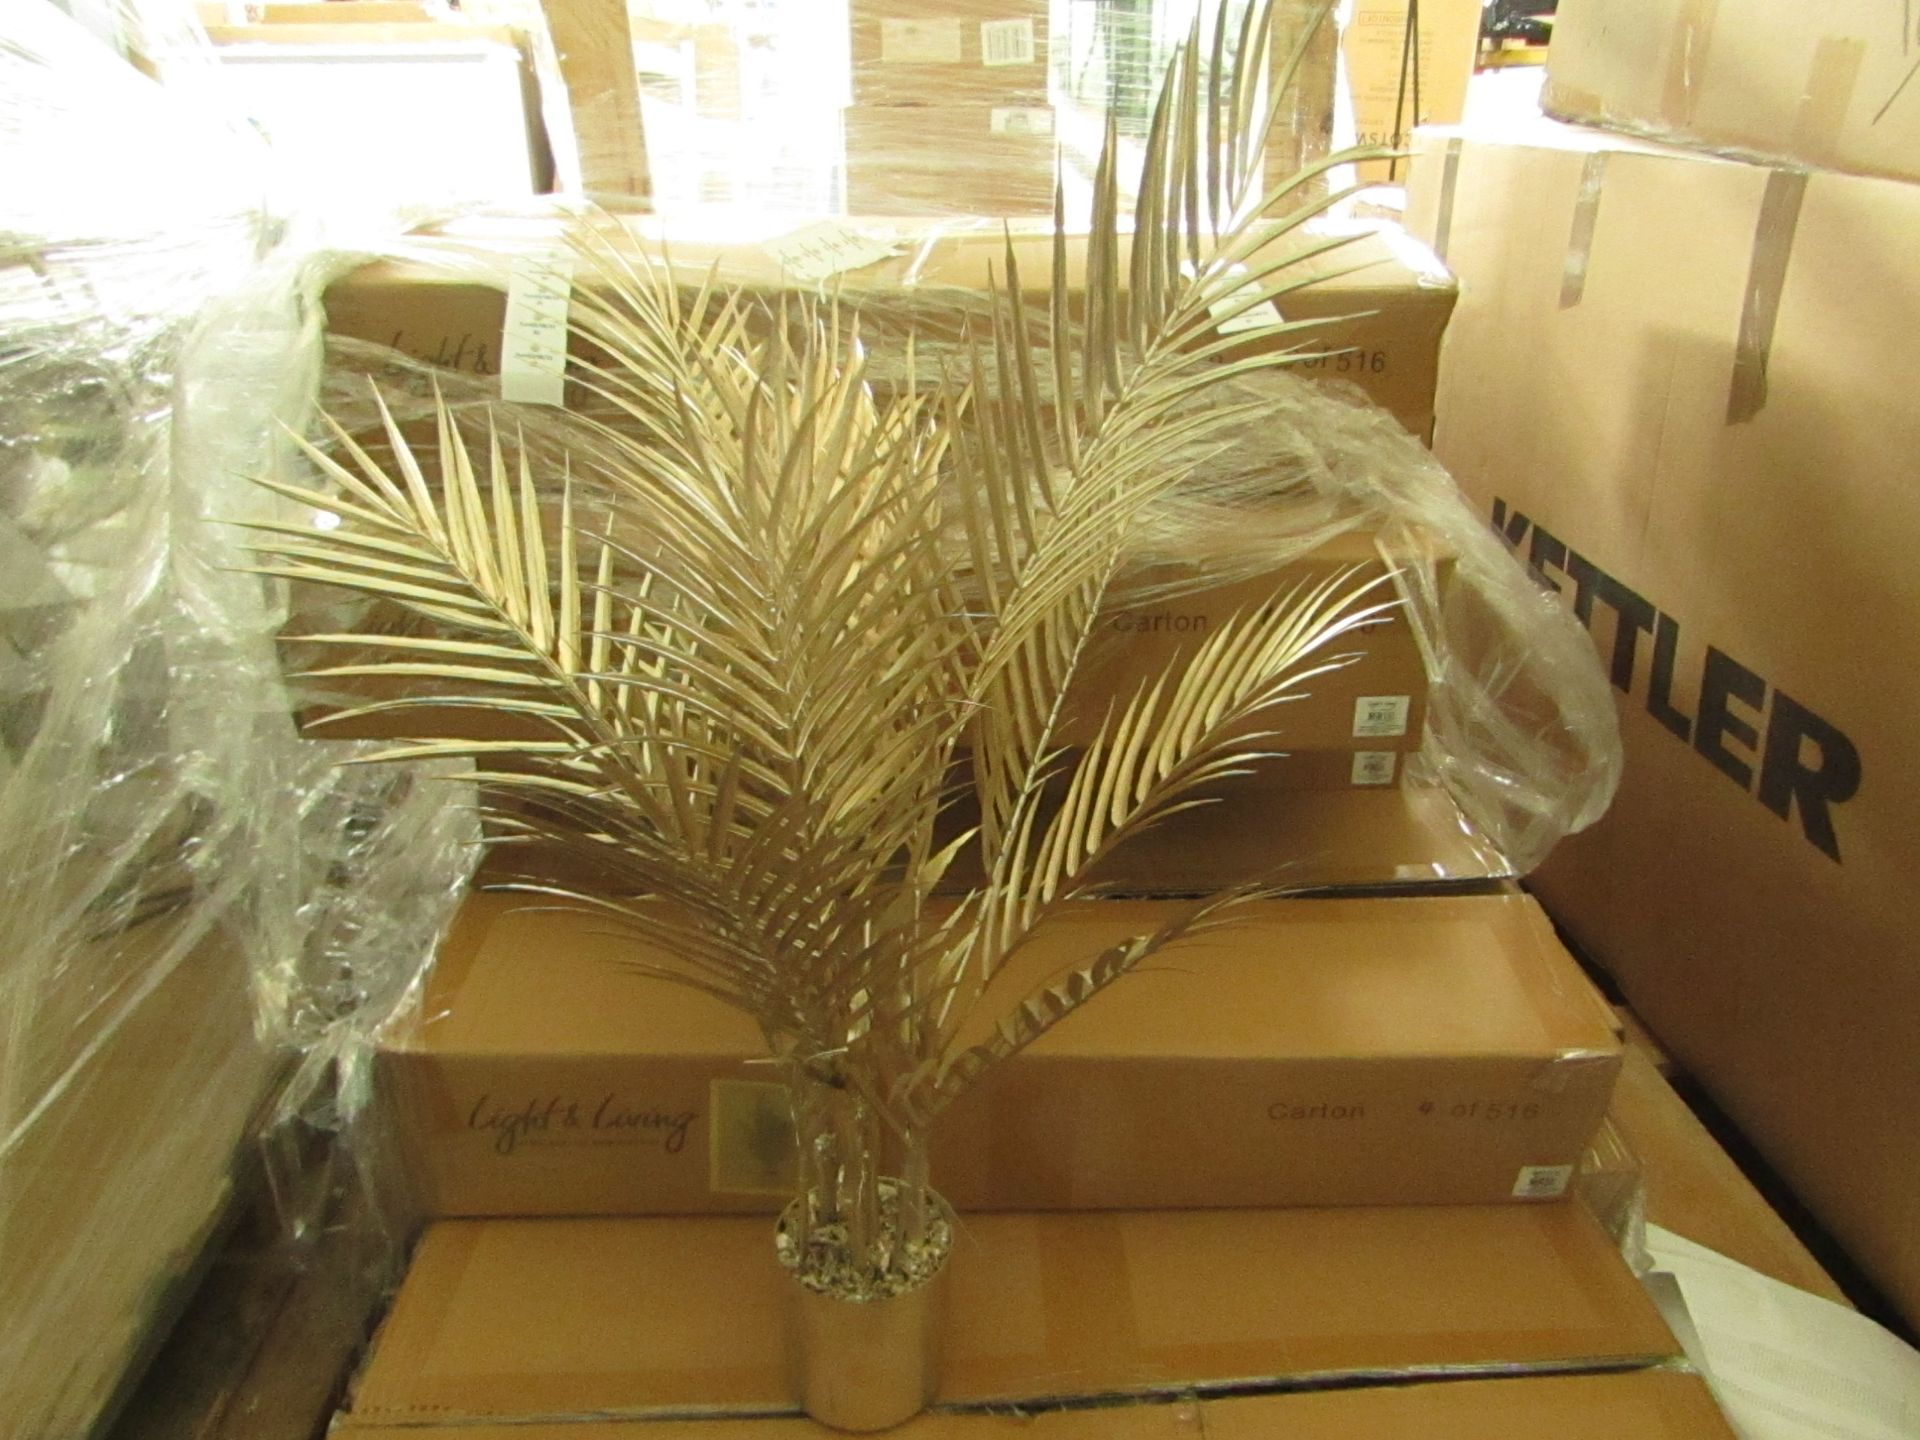 Rowen Group Brynn Medium Champagne Potted Palm Tree RRP Â£44.00 - This item looks to be in good